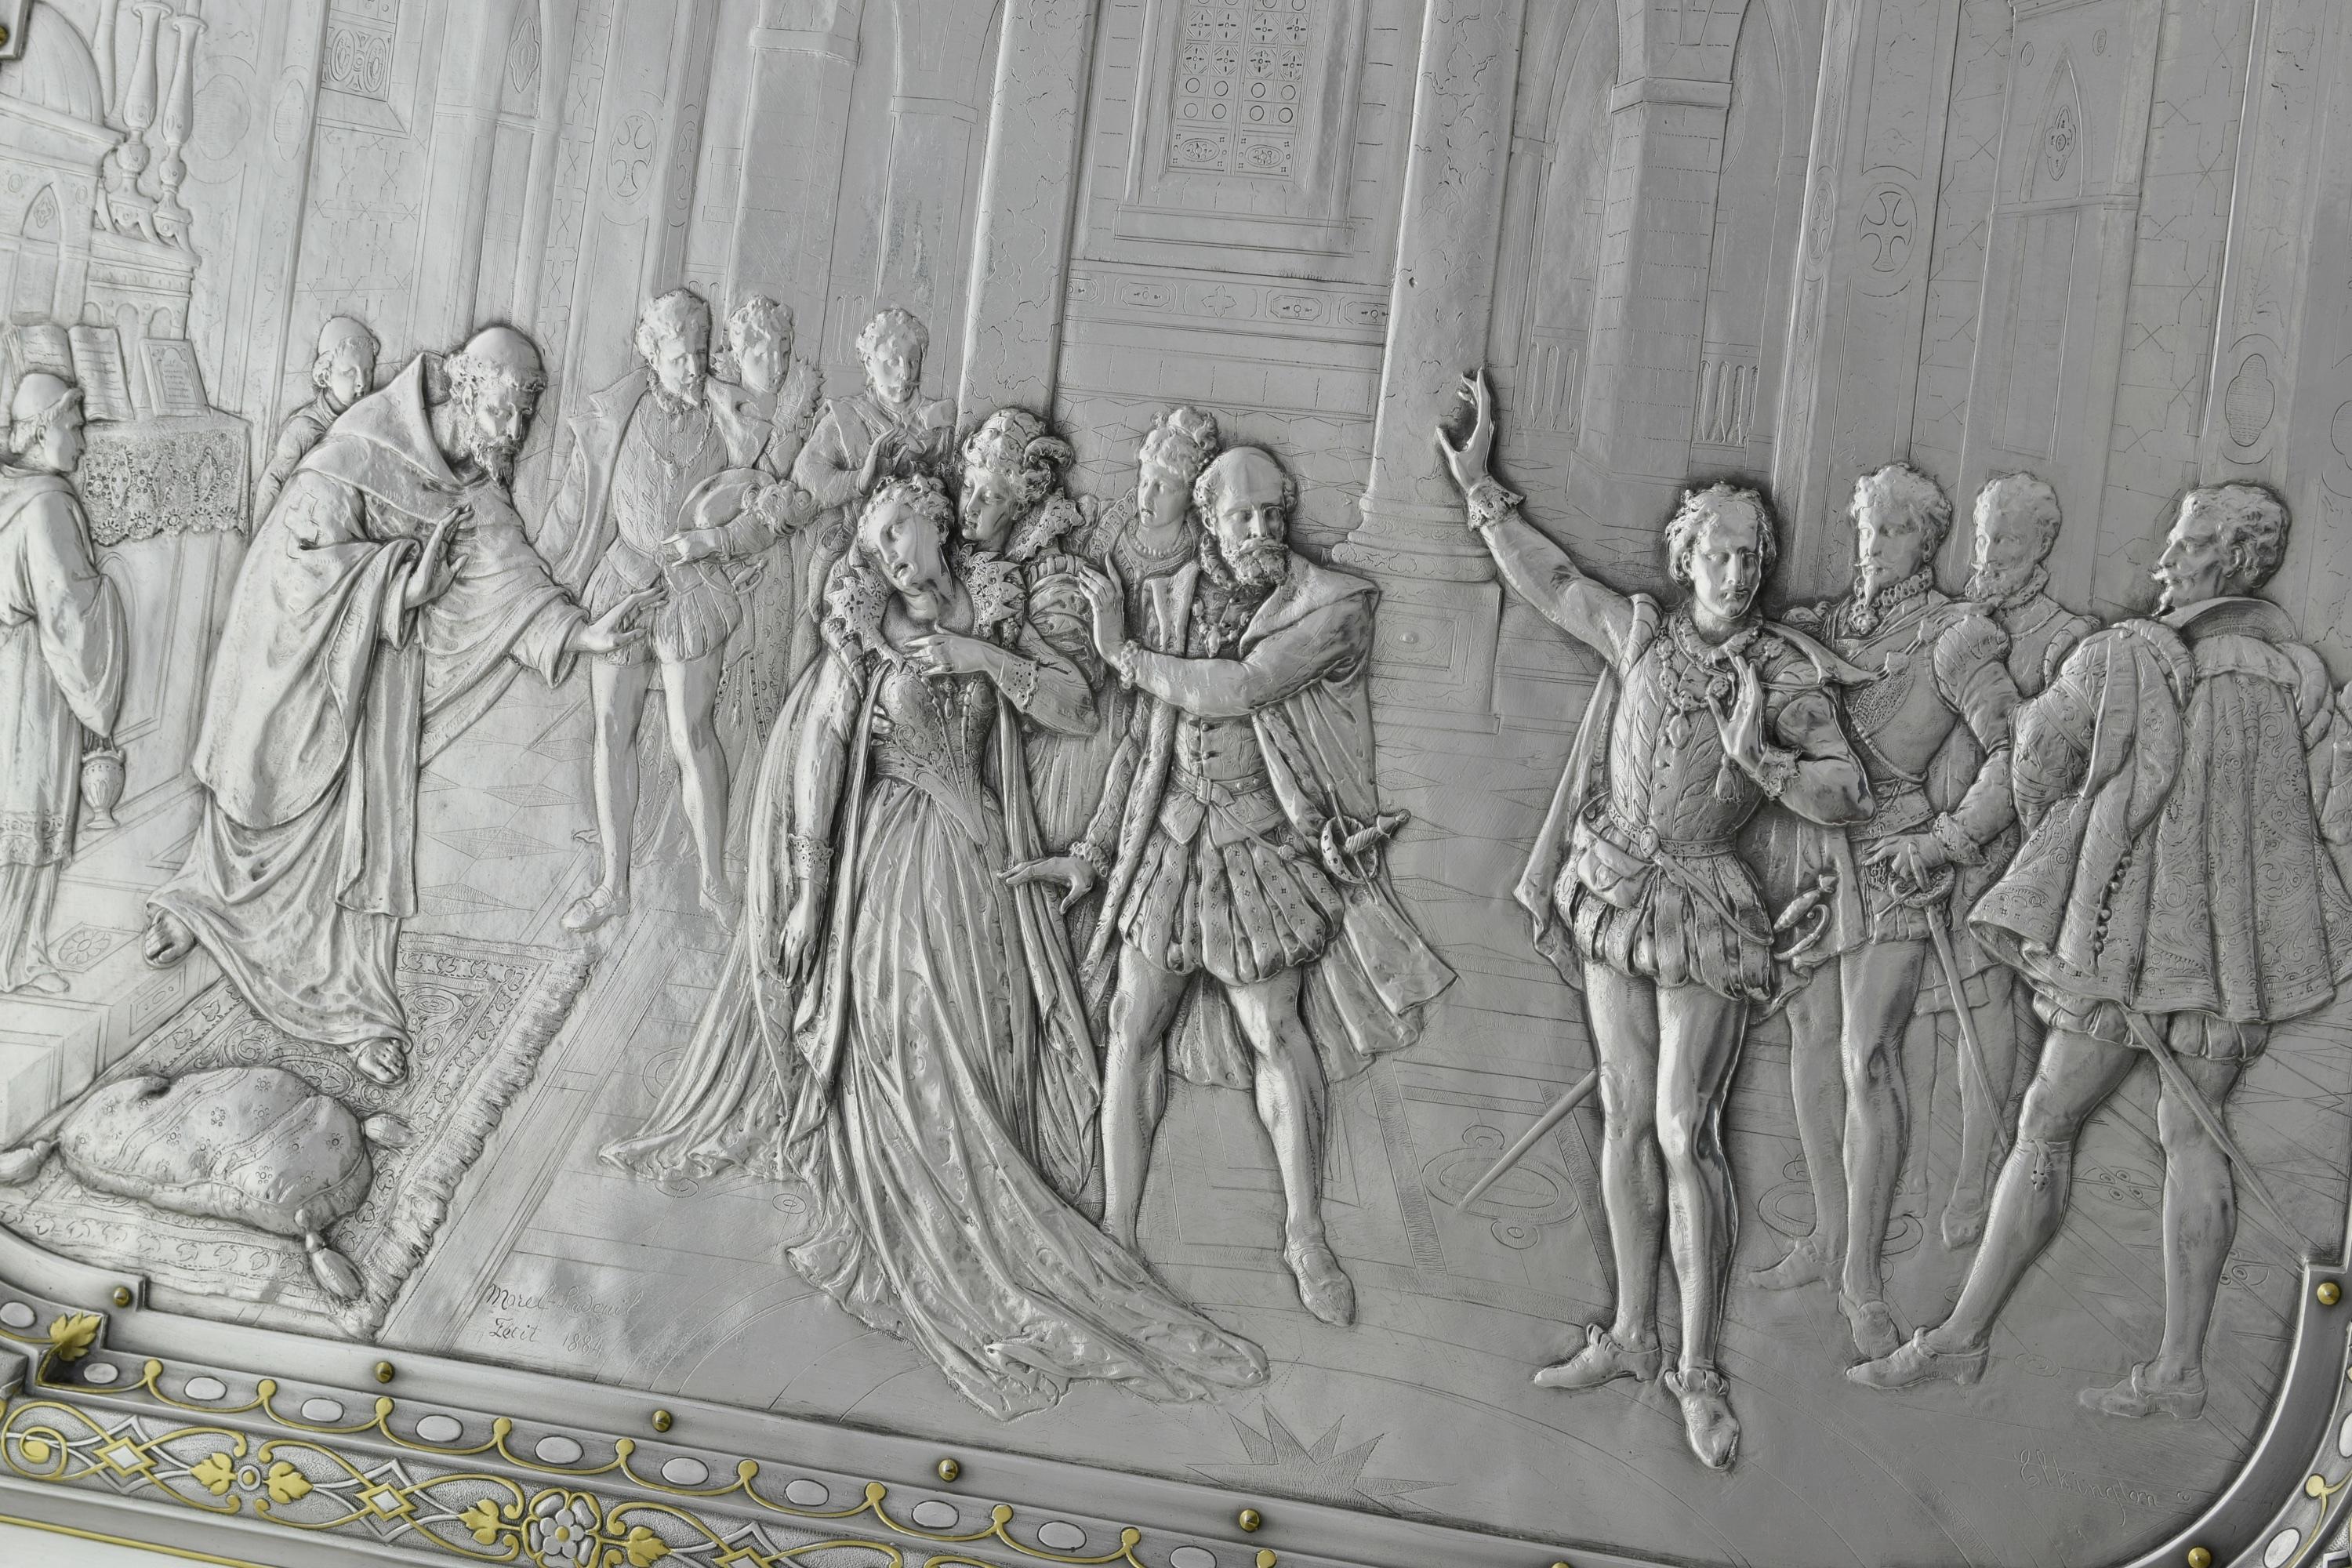 This parcel-gilt silver plated electrotype plaque demonstrates a marriage scene from the popular play 